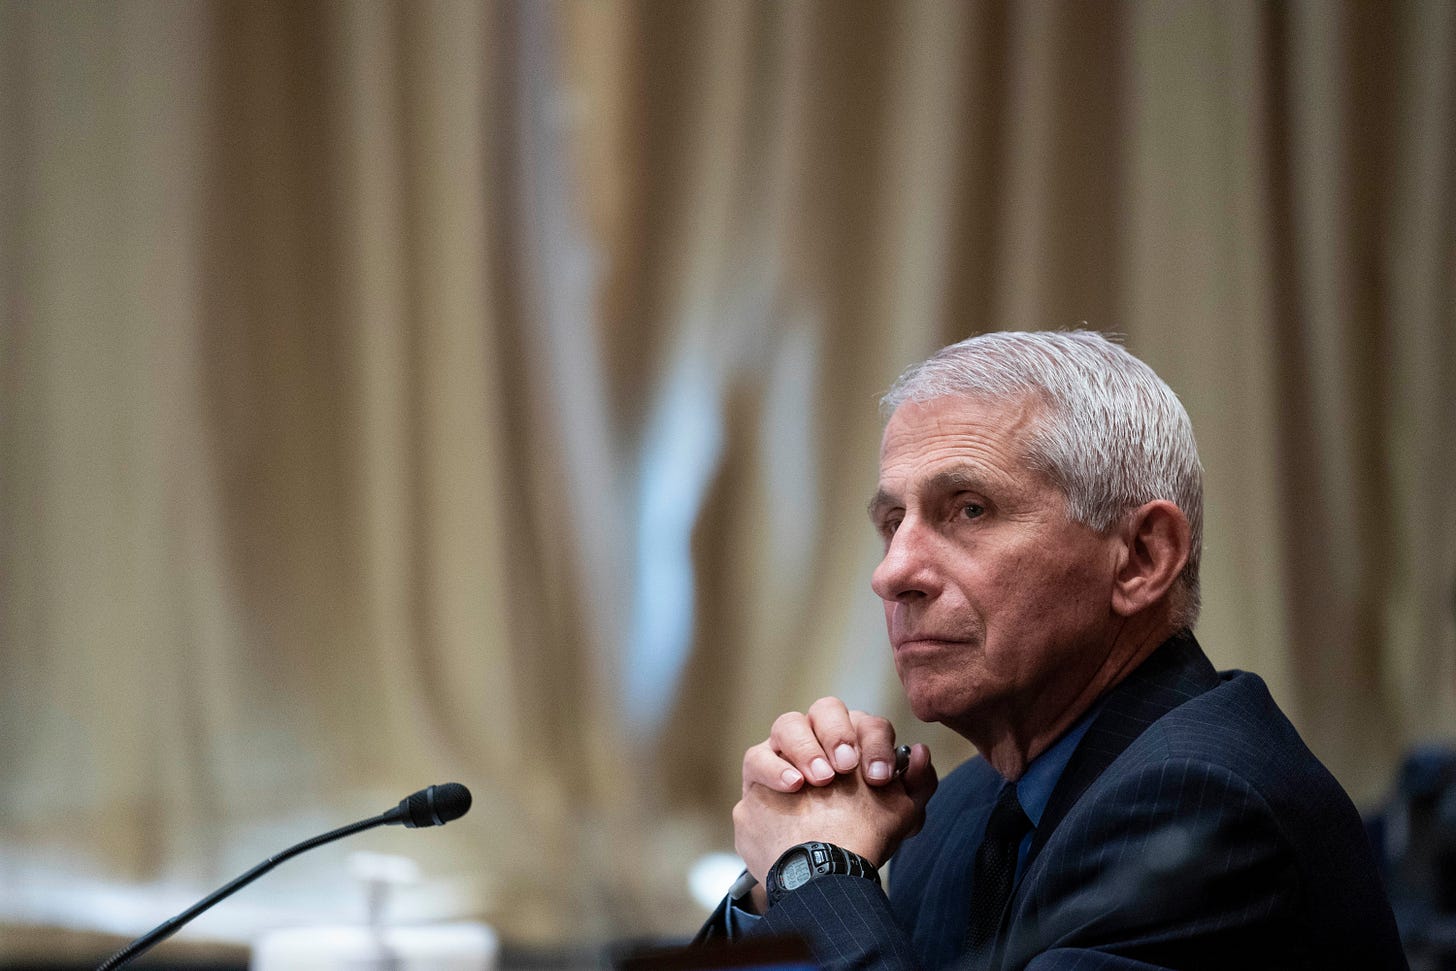 Dr. Anthony Fauci confirmed during a congressional hearing that he had no assurances on how the $600,000 grant to the Wuhan Institute of Virology was spent